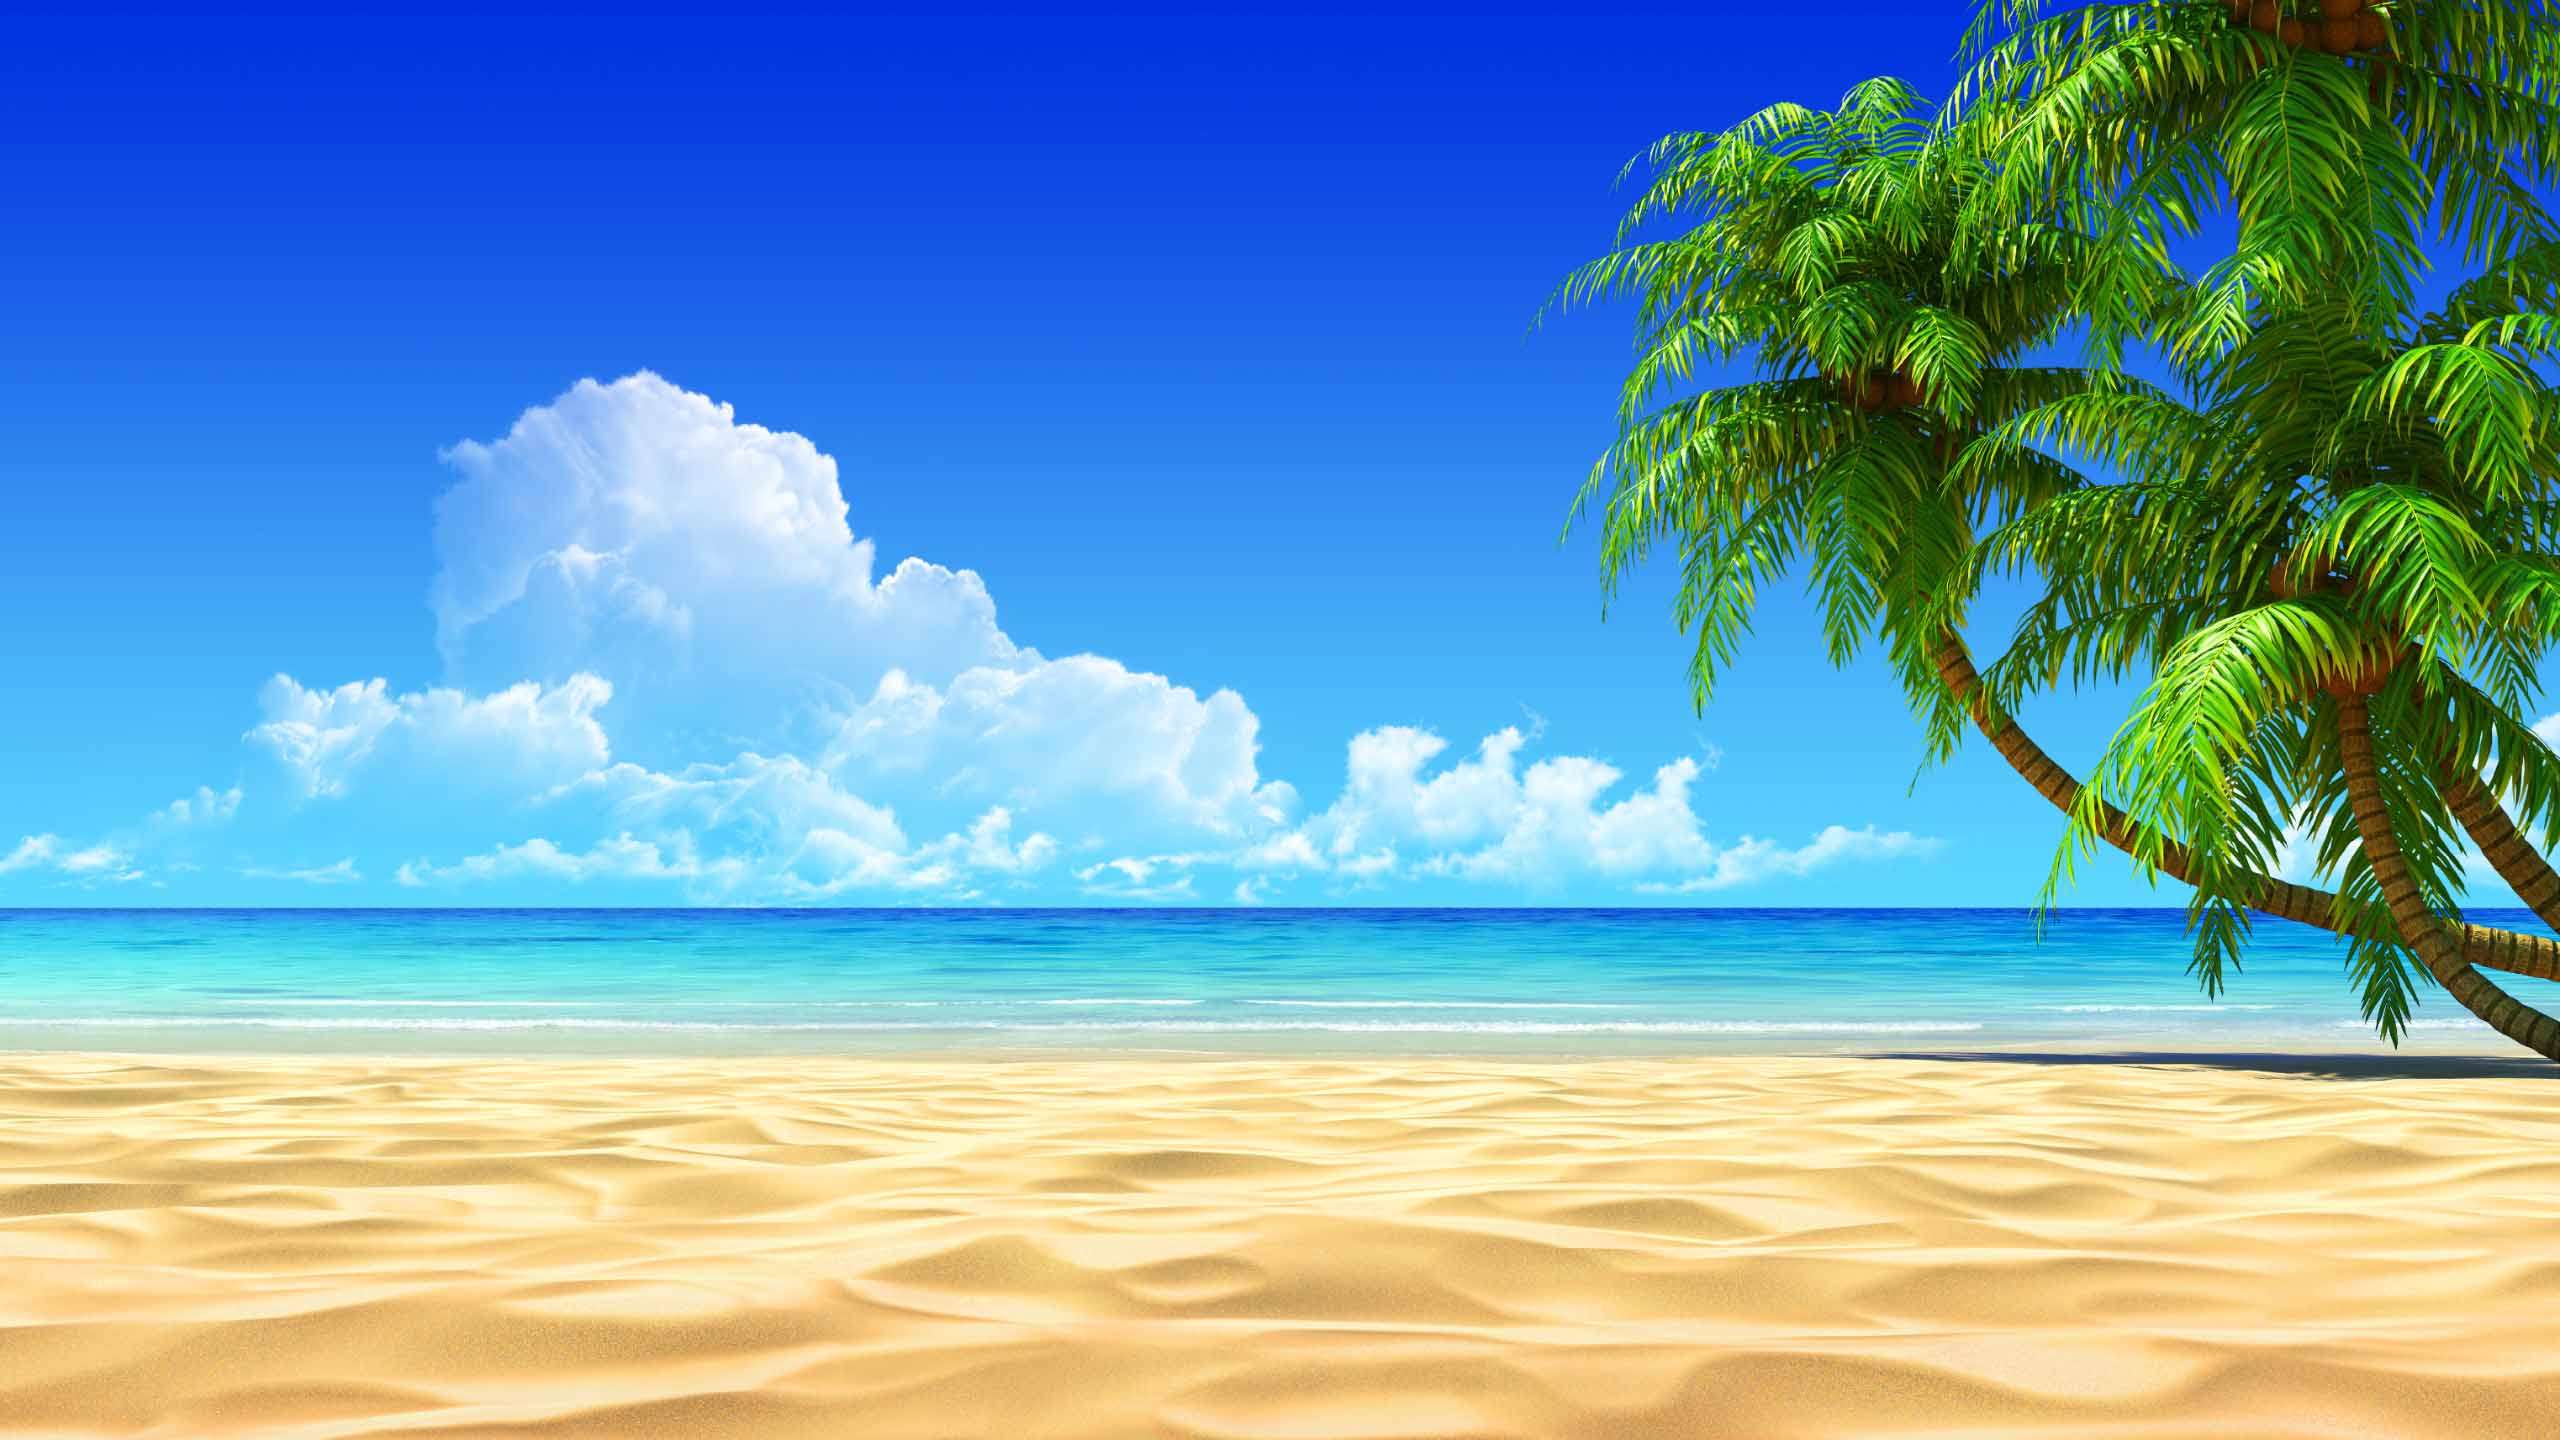 Sandy Sunny Beach Picture #4246191, 2560x1440 | All For Desktop